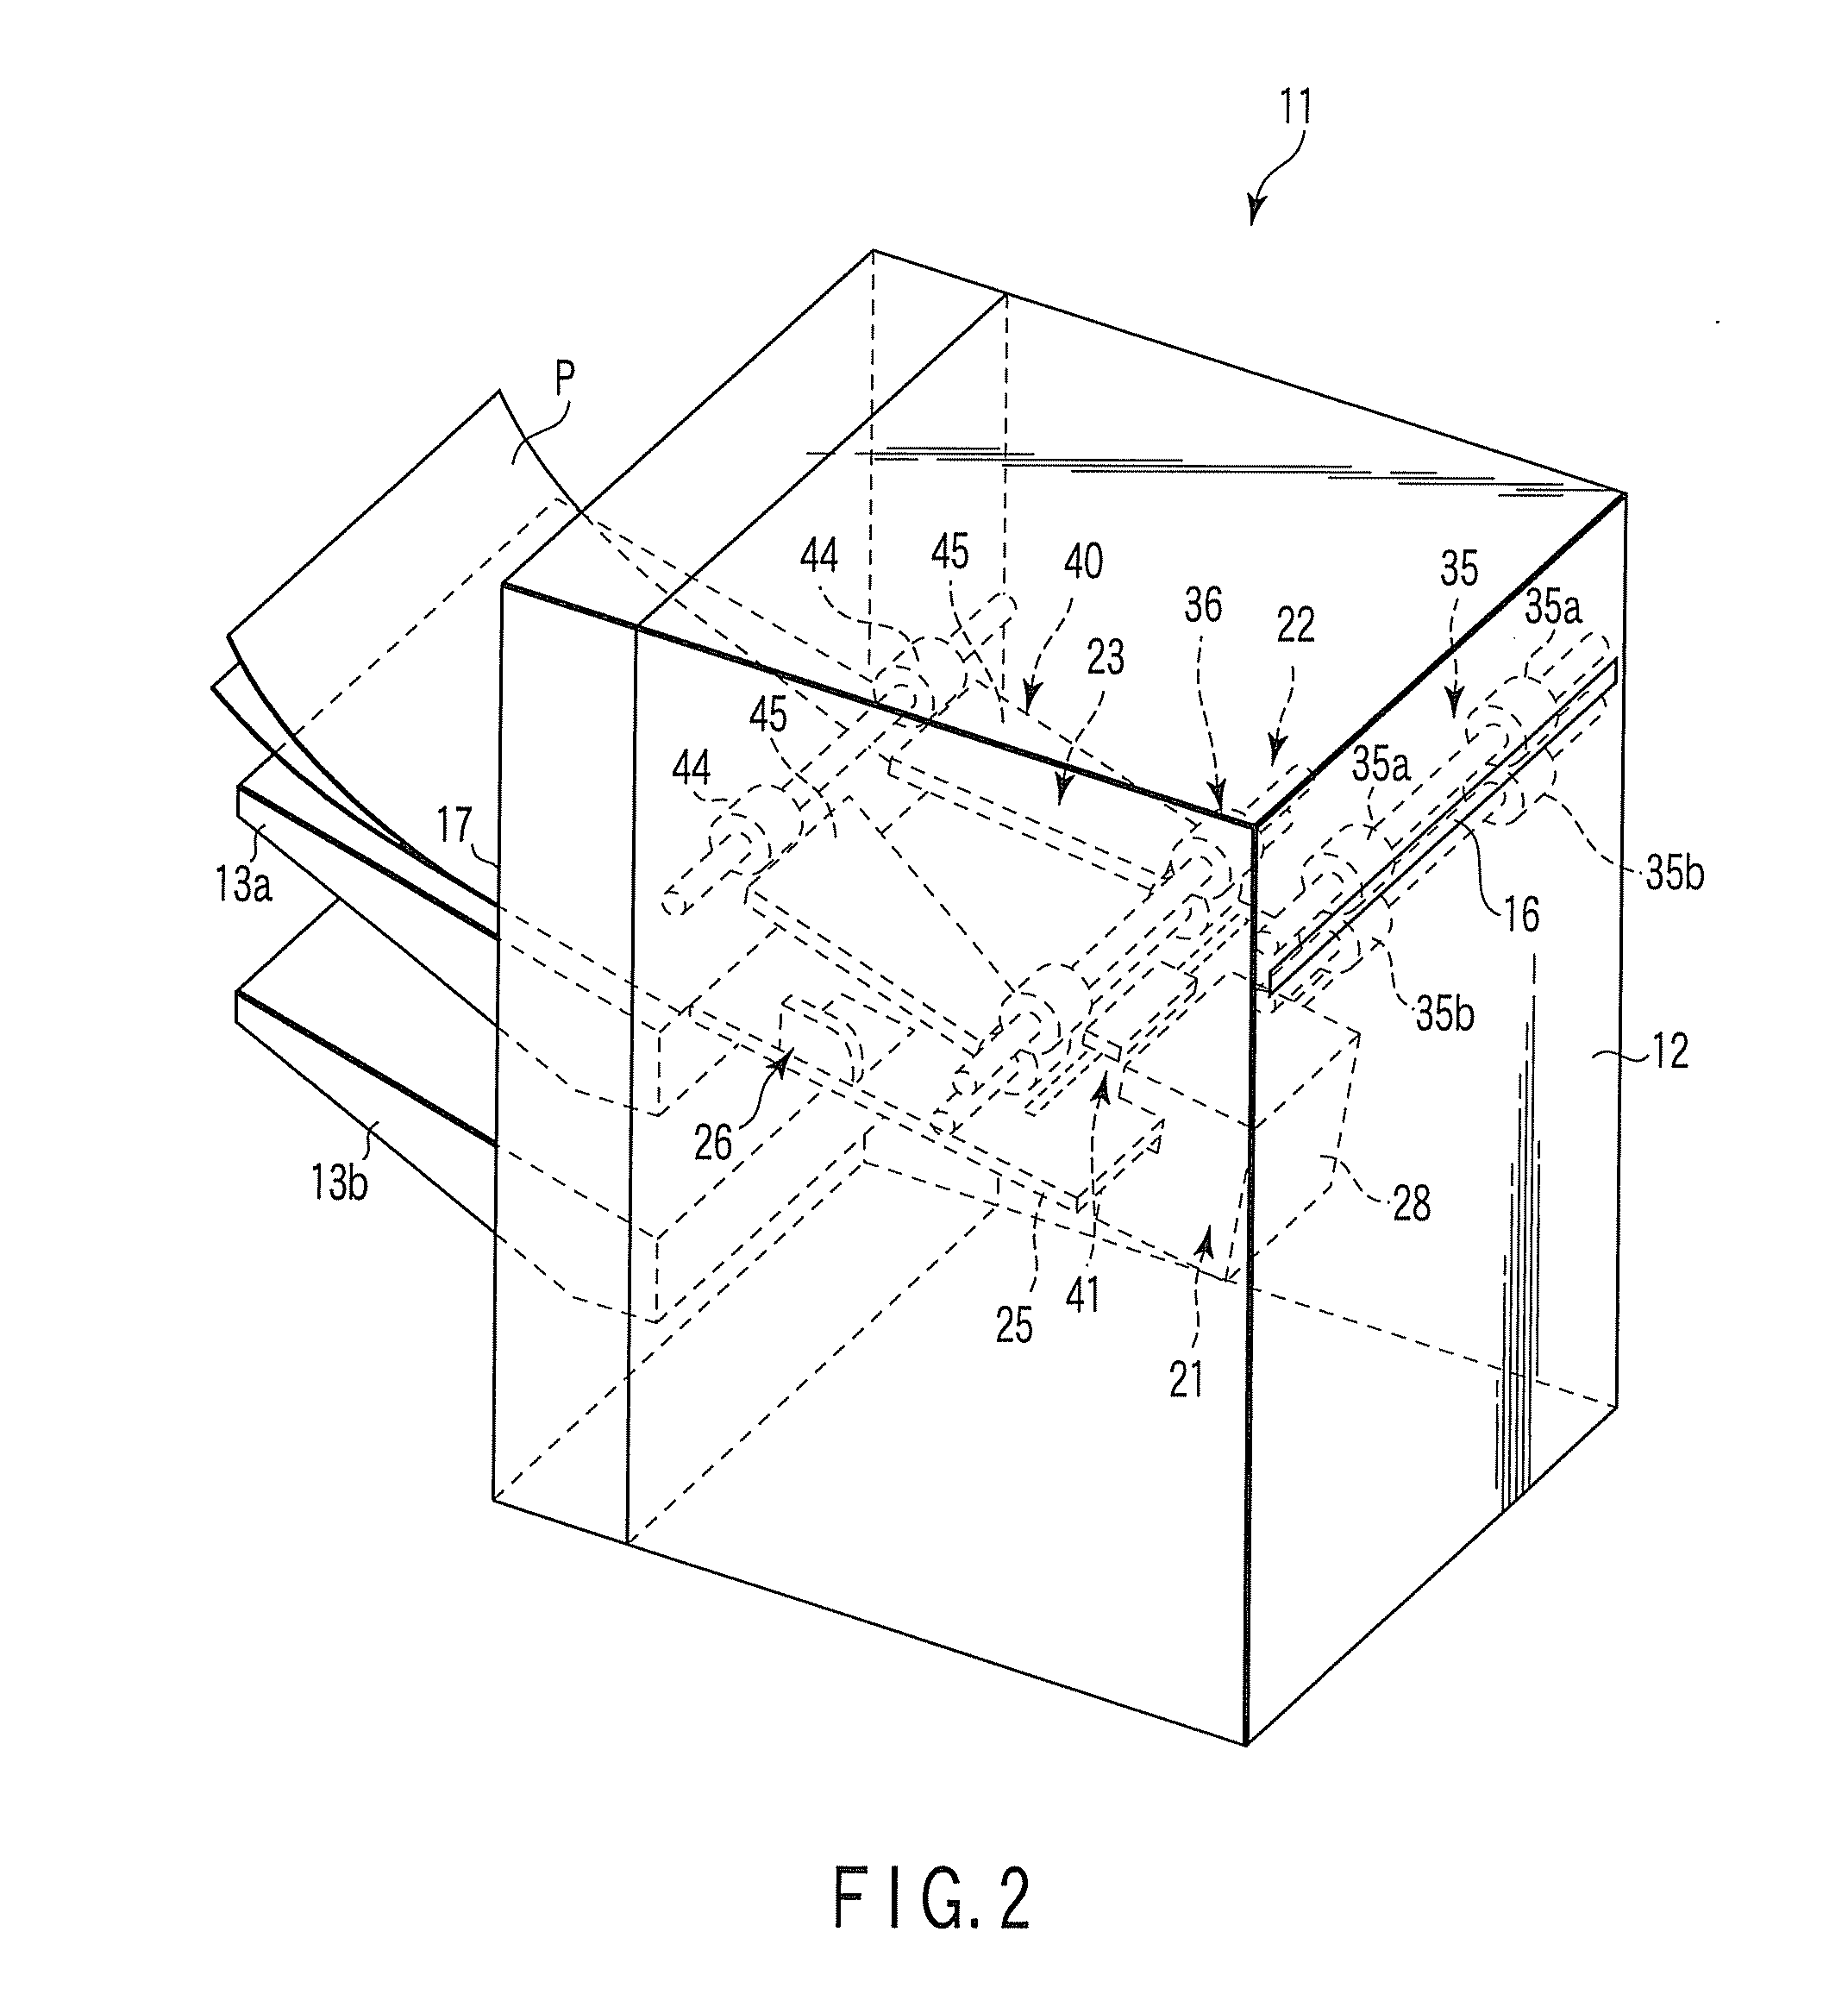 Method and apparatus for processing printed sheets incorporated reference